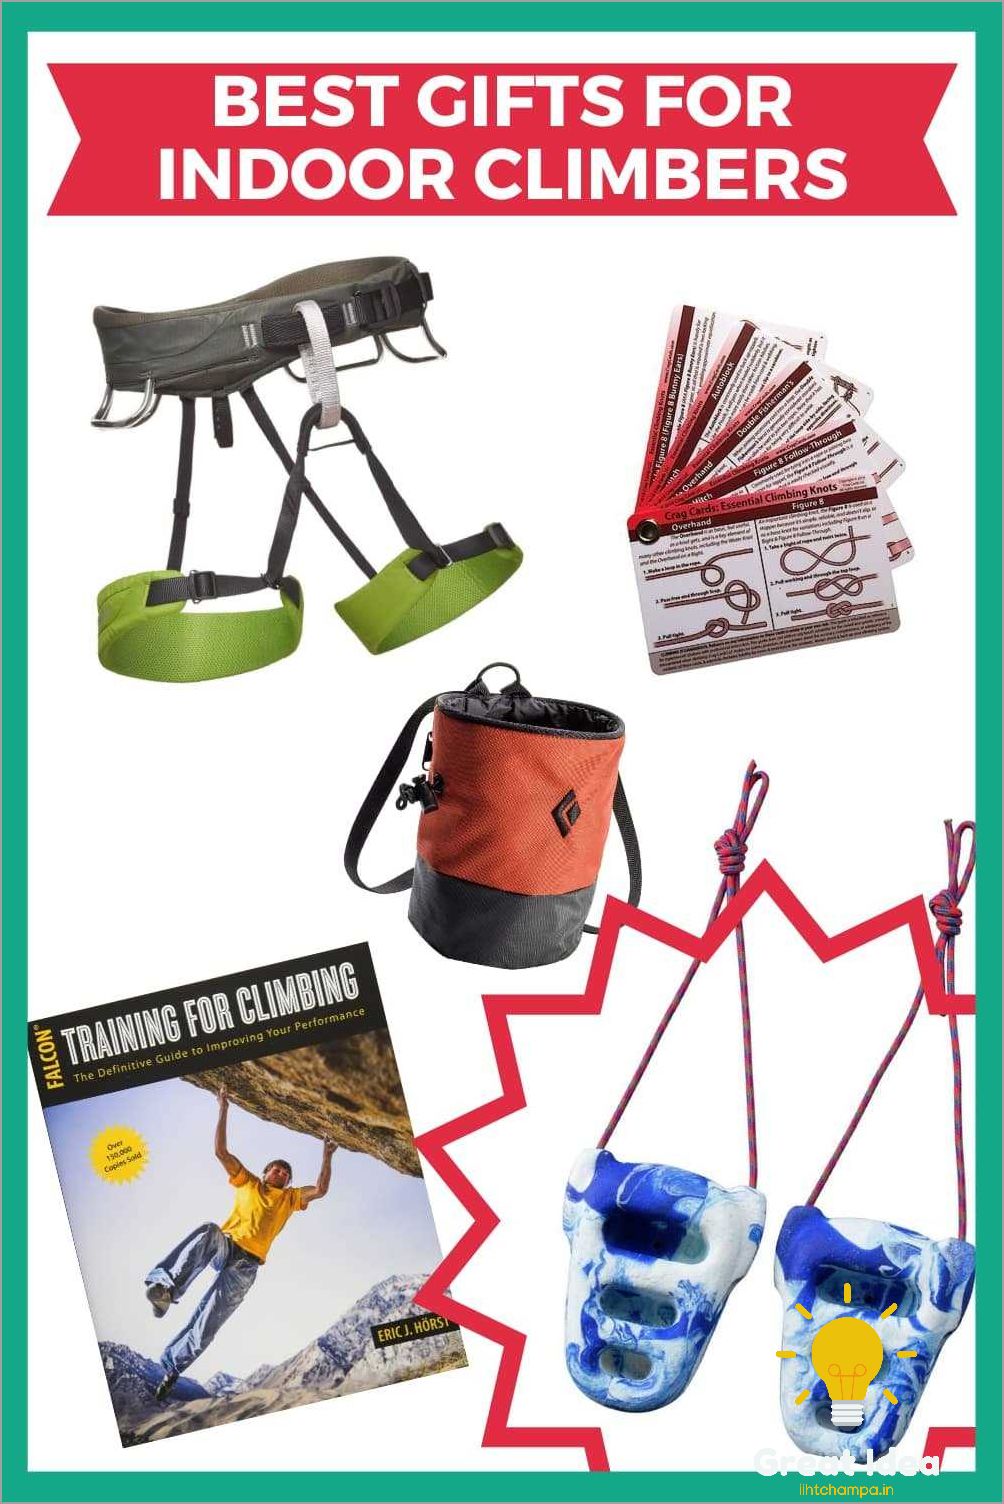 Top 10 Gift Ideas for Climbers – Perfect Presents for Climbing Enthusiasts